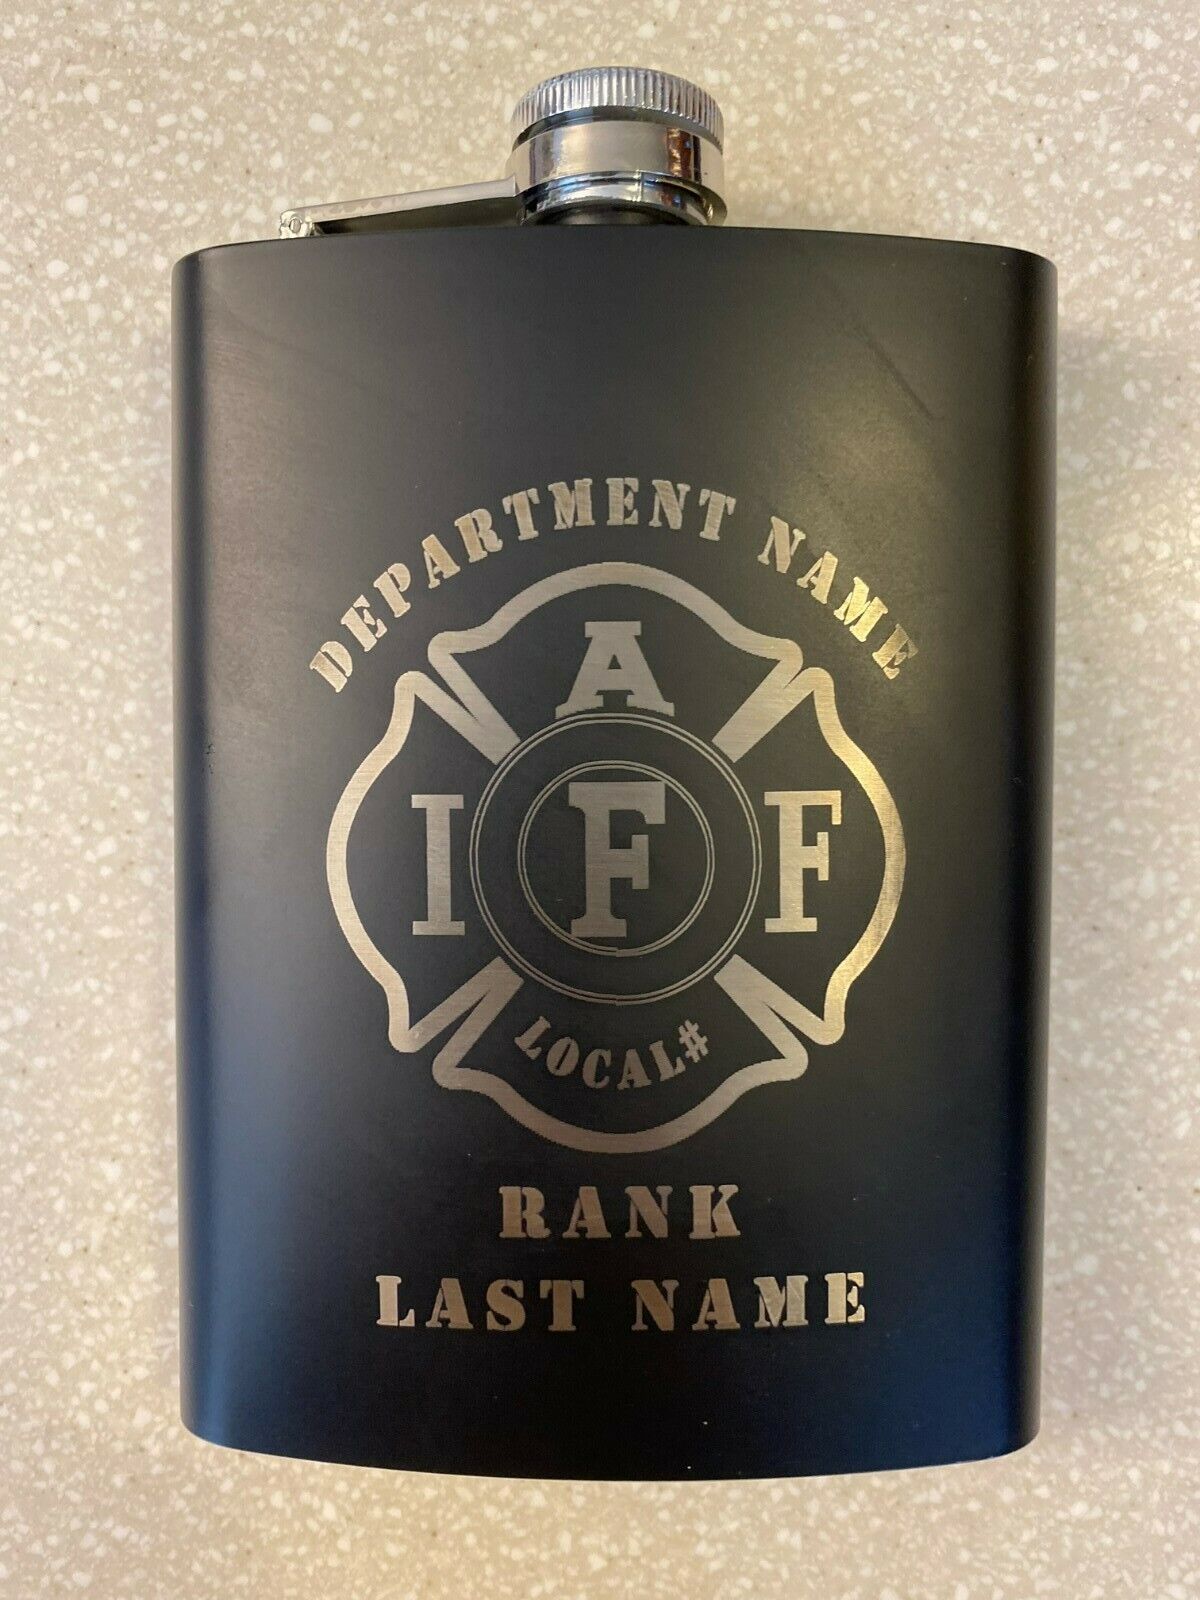 Customized IAFF flask. 8 ounce new with personalized local number, name and rank